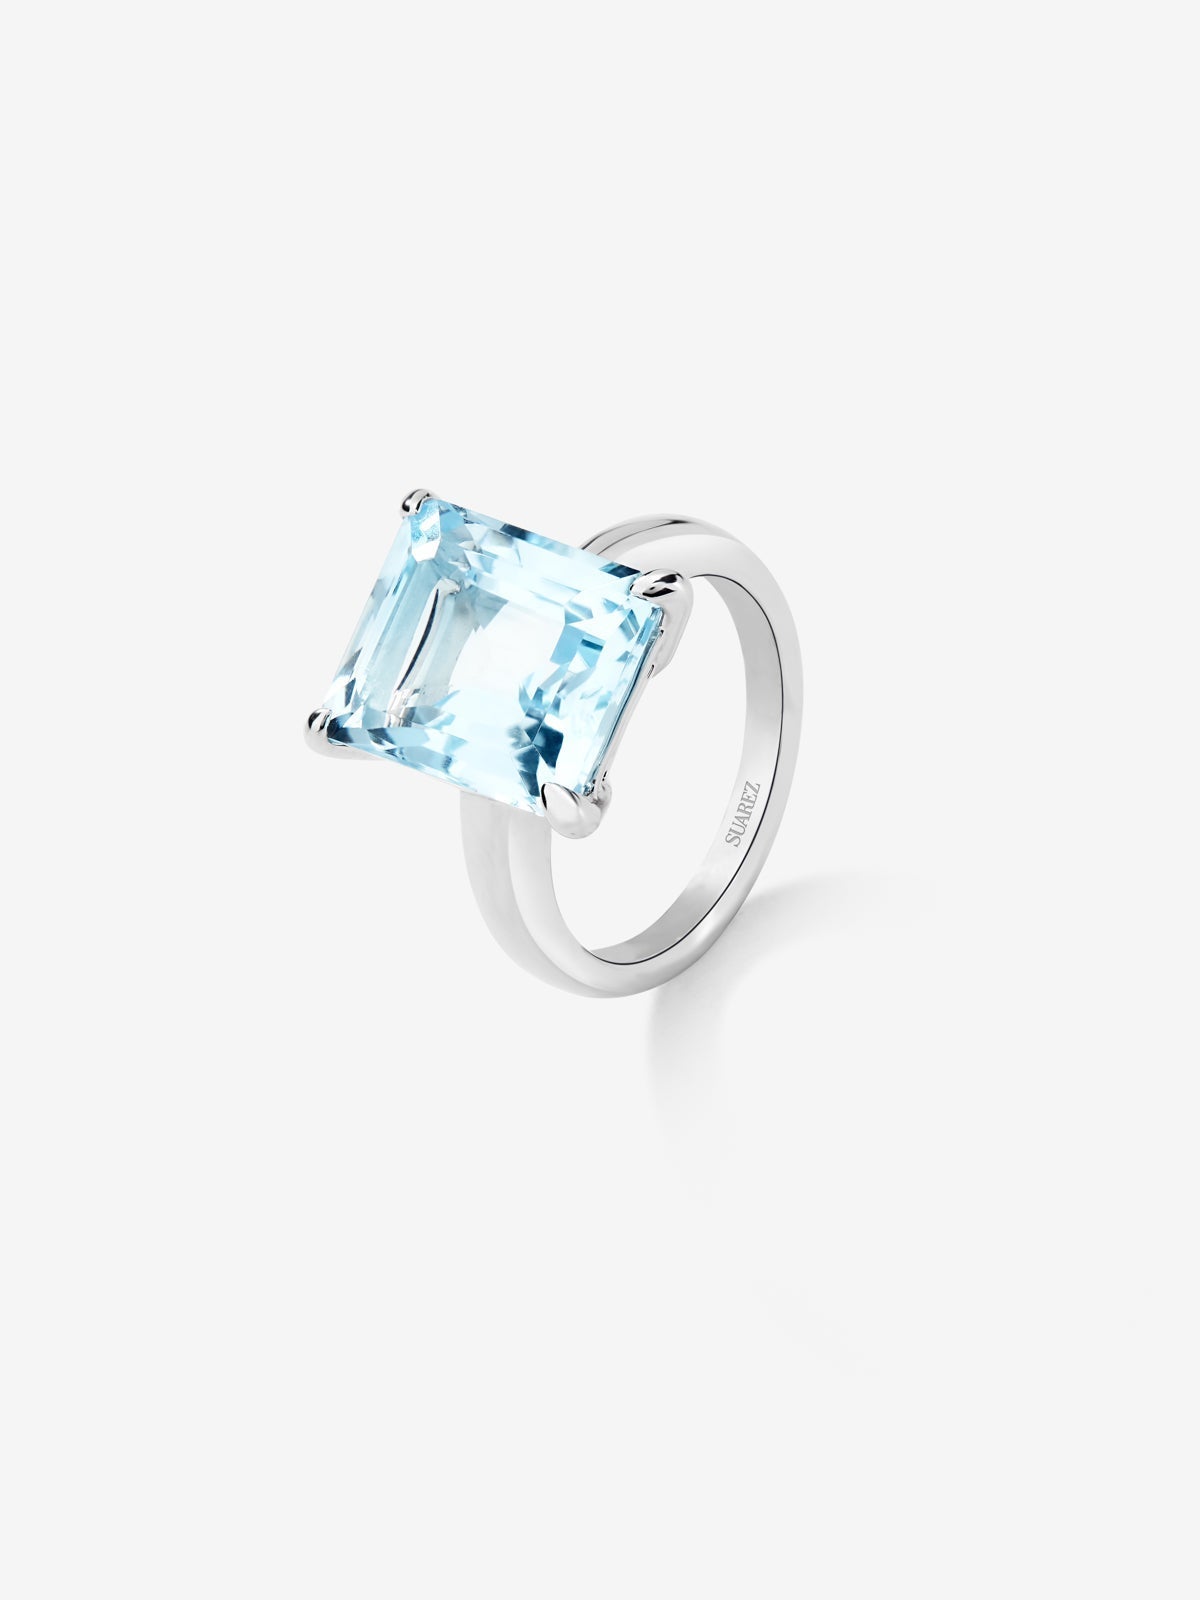 925 silver cocktail ring with sky blue topaz in octagonal cut of 9.4 cts